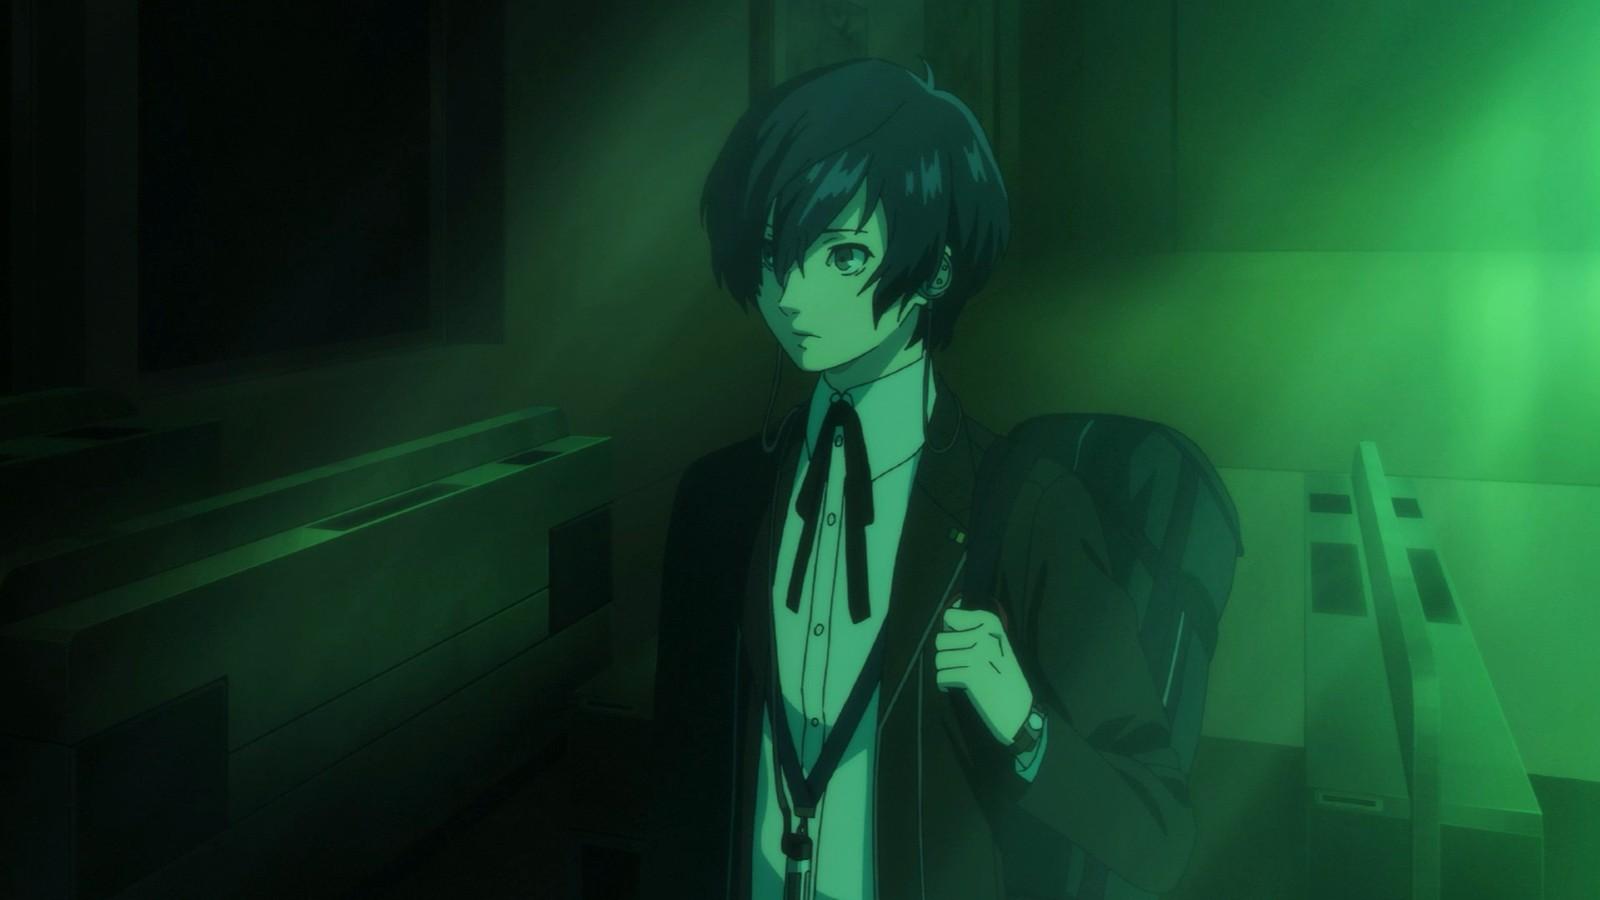 An image of the Persona 3 Reload protagonist.